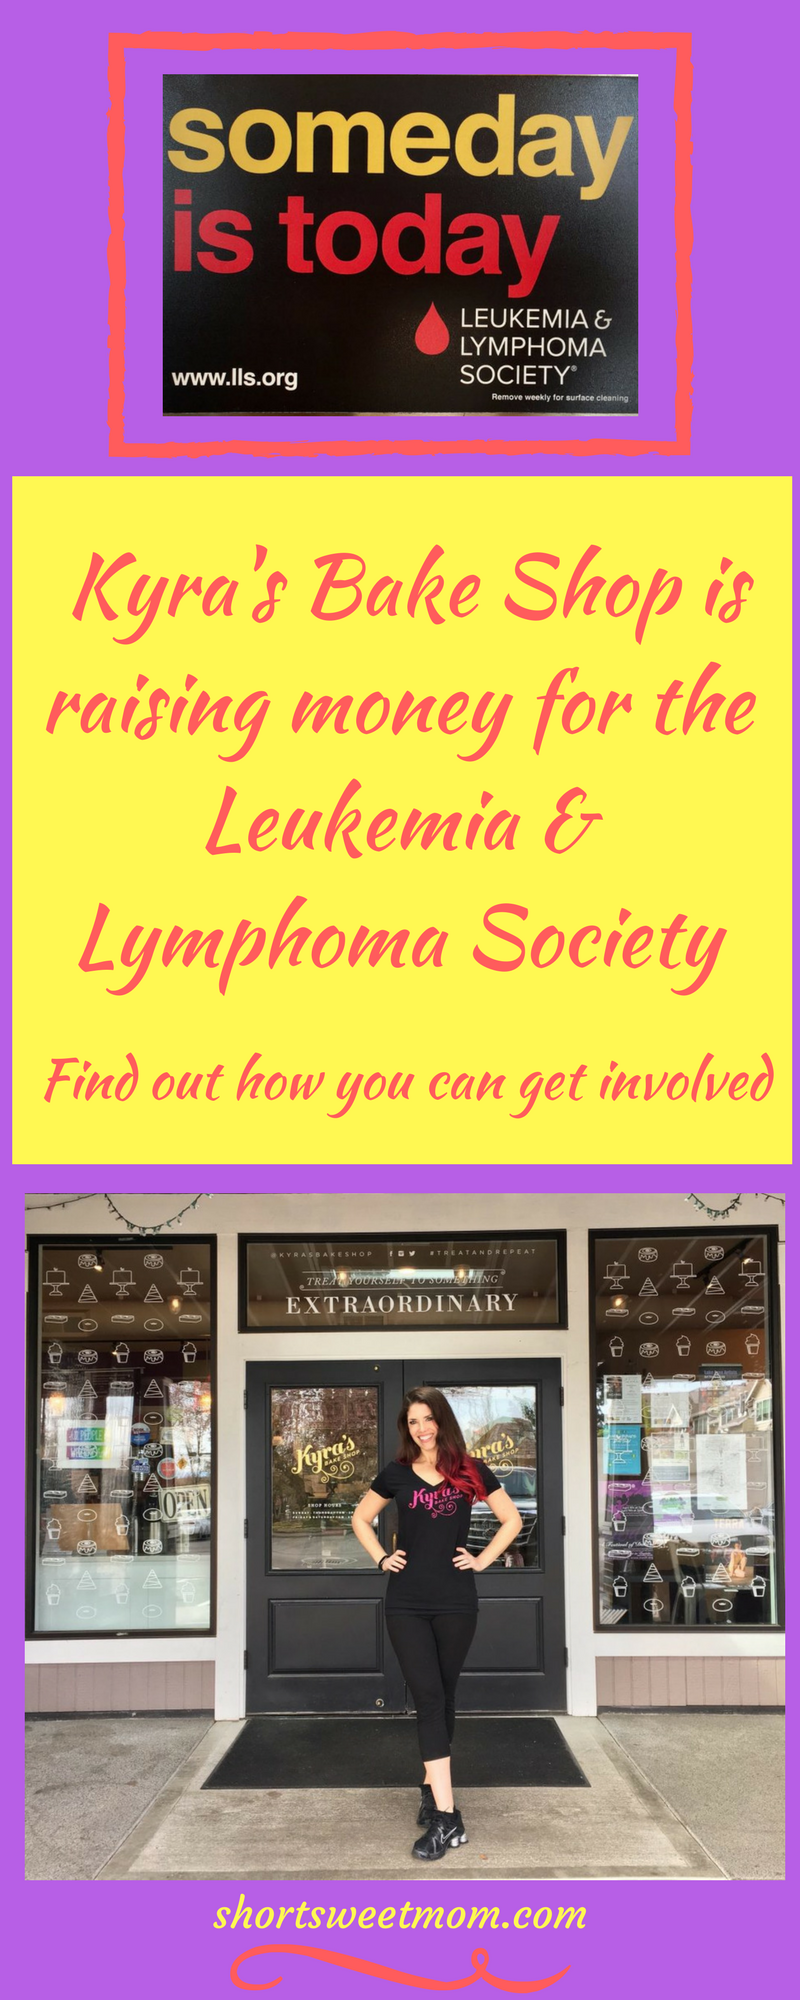 An Interview with Kyra Bussanich, Gluten Free Baker and 4-Time Winner of Cupcake Wars. Visit shortsweetmom.com to learn Kyra's personal story and to find out about her recent partnership with The Leukemia & Lymphoma Society.